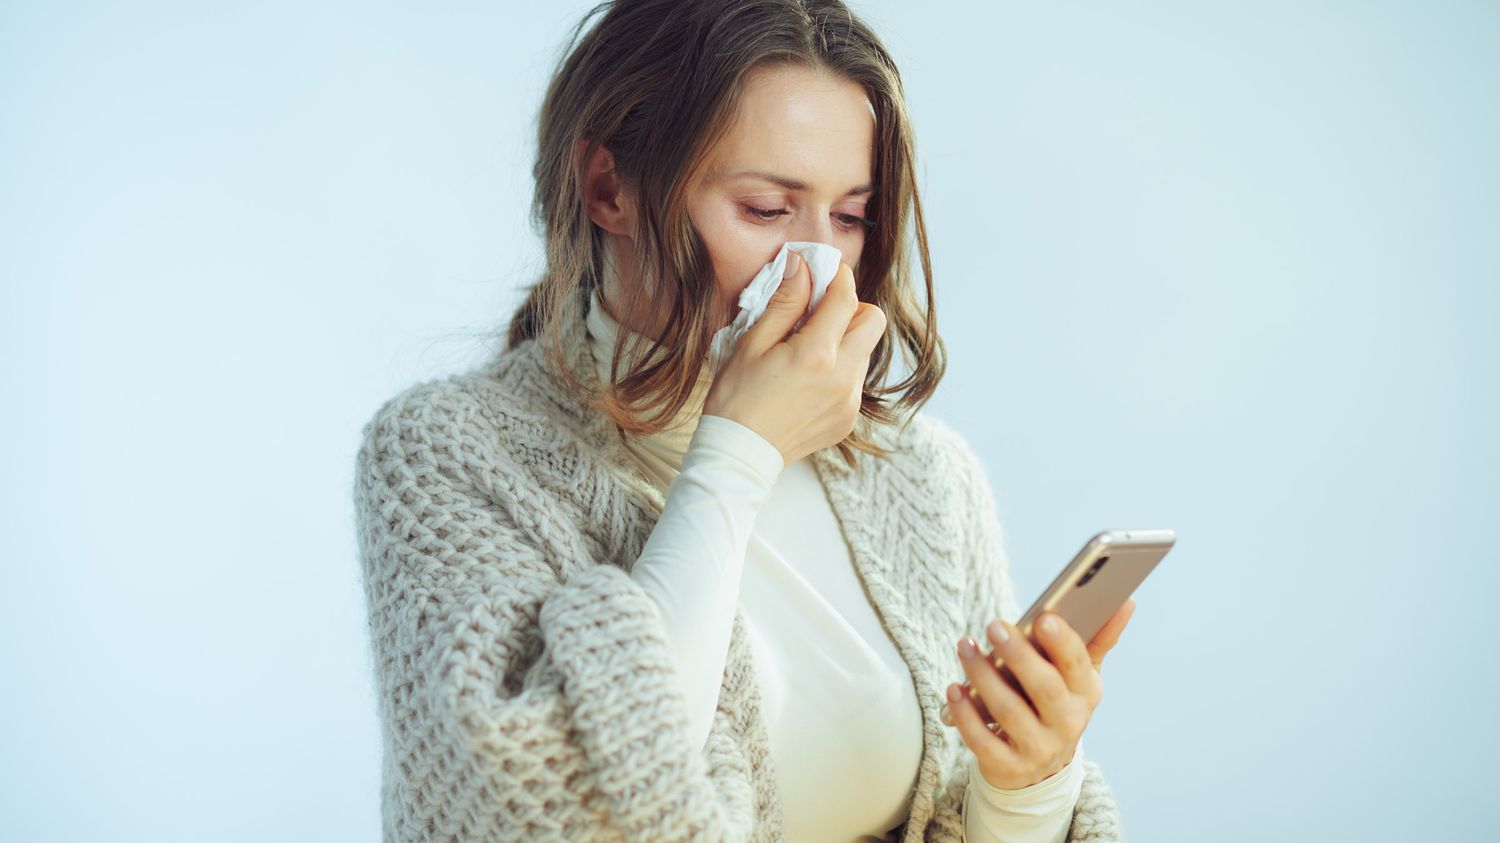 coldsense-app-from-zicam-will-tell-you-when-youre-at-risk-for-a-cold